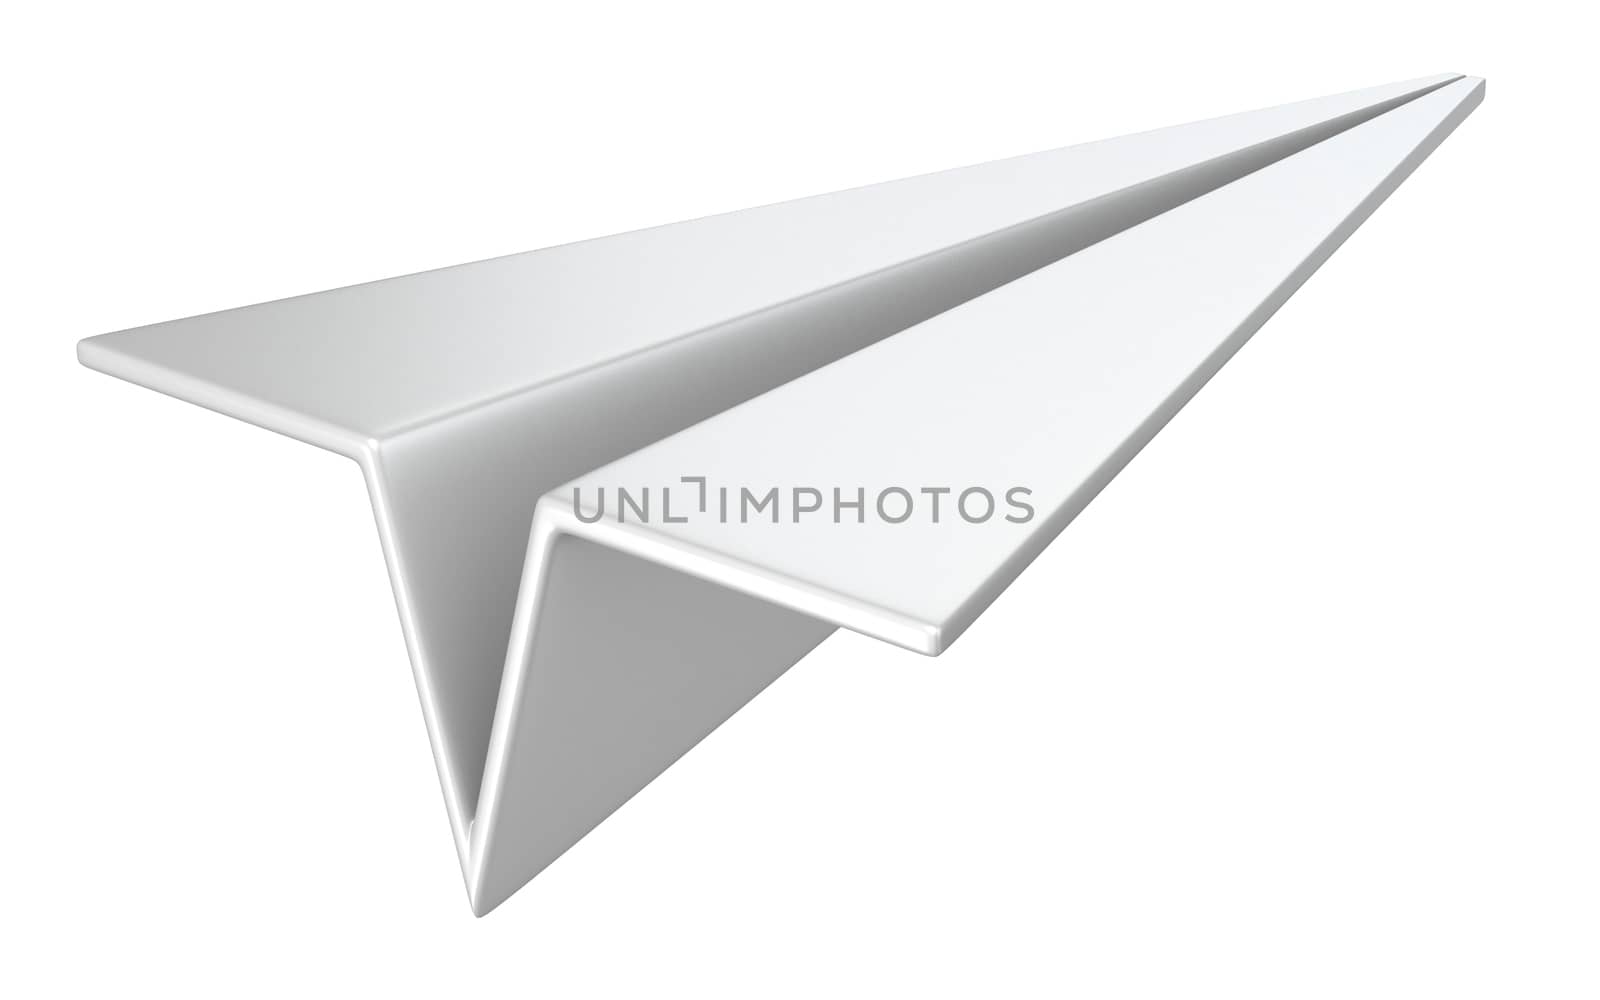 Flying paper plane 3D by djmilic